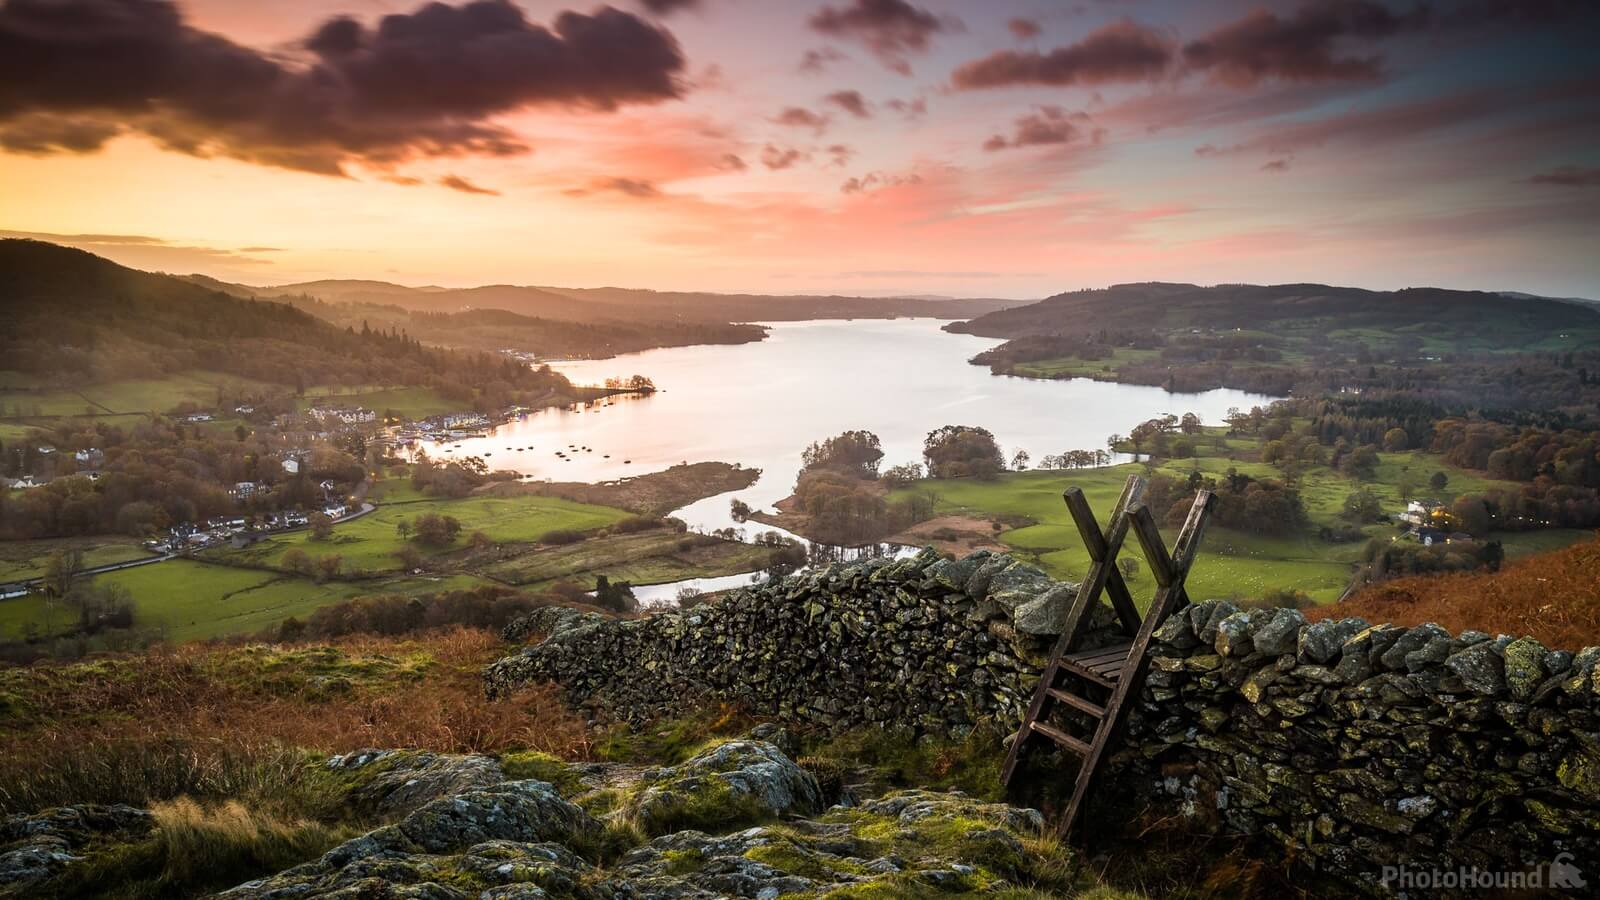 Image of Loughrigg Fell by Chris Sale